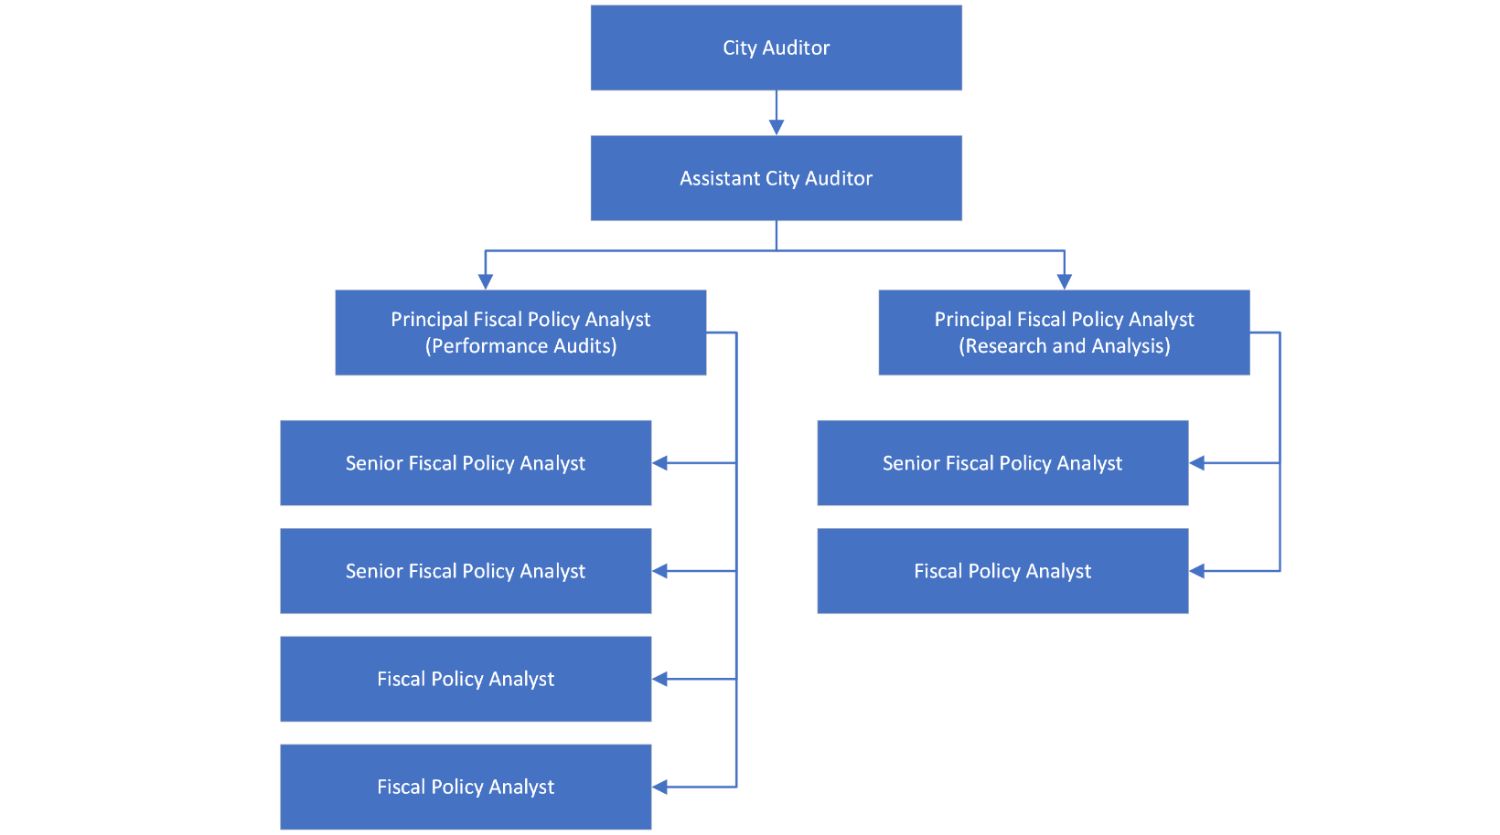 Organization chart showing: top level as 1 City Auditor, next level as 1 Assistant City Auditor, next level as 1 Principal Fiscal Policy Analyst over Performance Audits and 1 Principal Fiscal Policy Analyst over Research and Analysis, 2 Senior Fiscal Policy Analysts and 2 Fiscal Policy Analysts under the Principal Fiscal Policy Analyst over Performance Audits,  and 1 Senior Fiscal Policy Analyst and 1 Fiscal Policy Analyst under the Principal Fiscal Policy Analyst over Research and Analysis